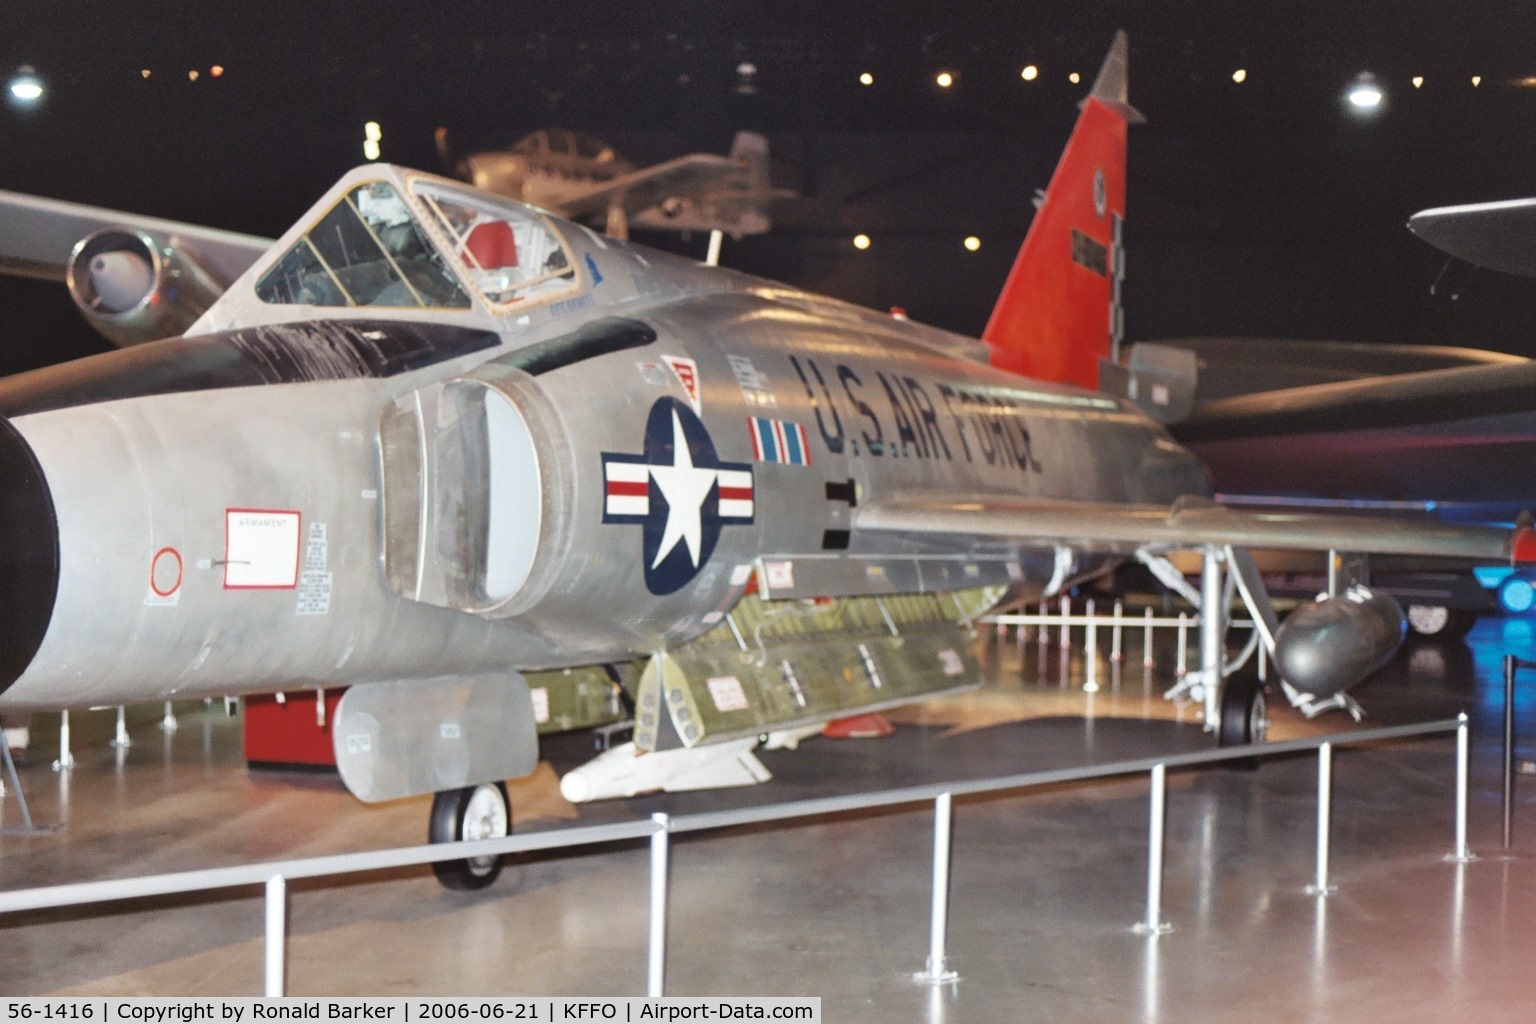 56-1416, 1956 Convair F-102A Delta Dagger C/N 8-10-363, National Museum of the Air Force